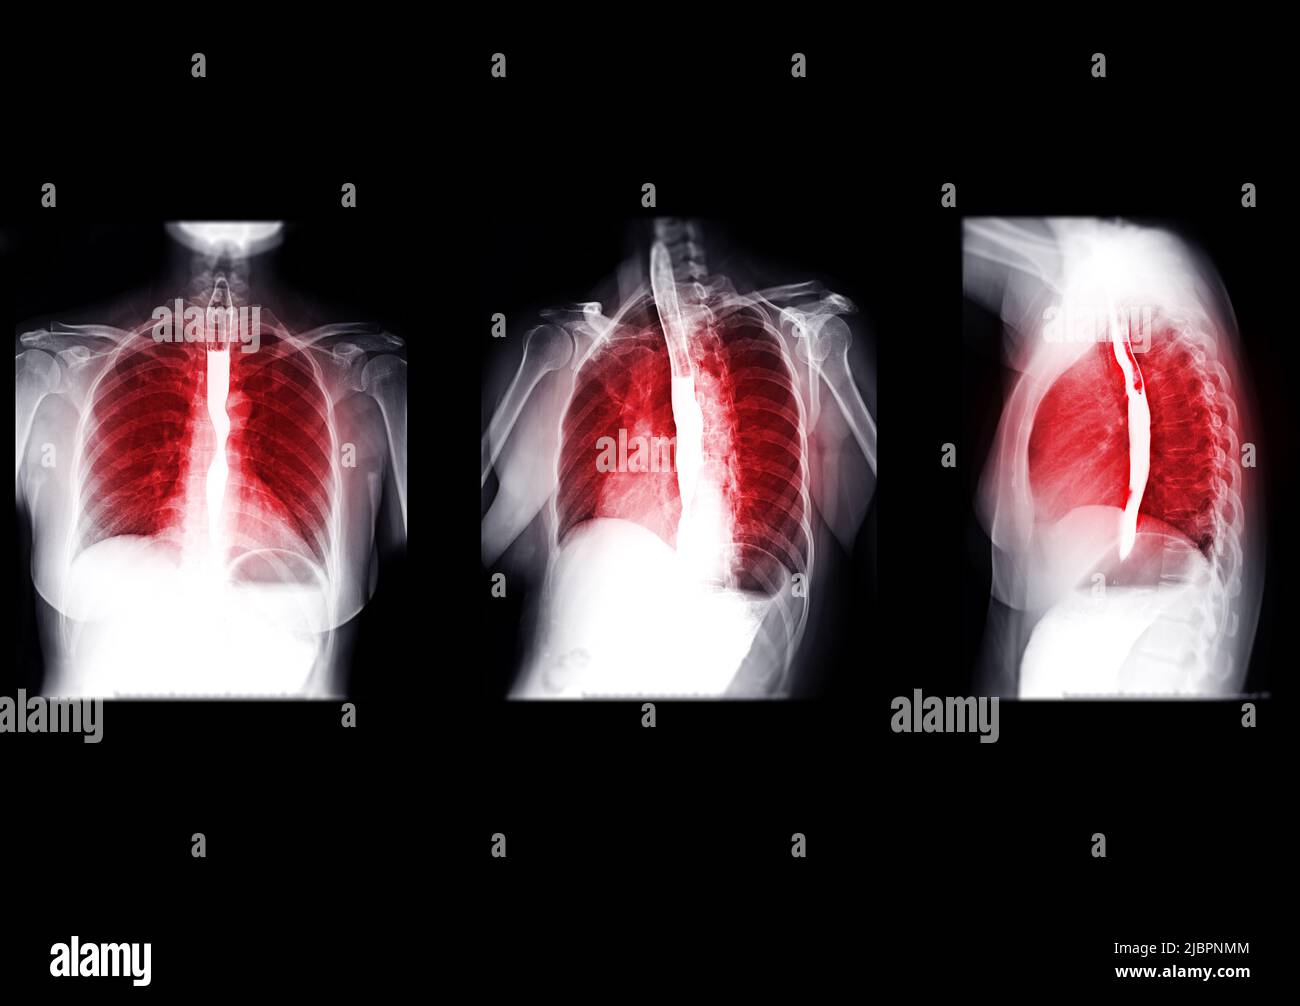 Collection of Esophagram or Barium swallow  showing esophagus for diagnosis GERD or Gastroesophageal reflux disease or Esophageal cancer. Stock Photo